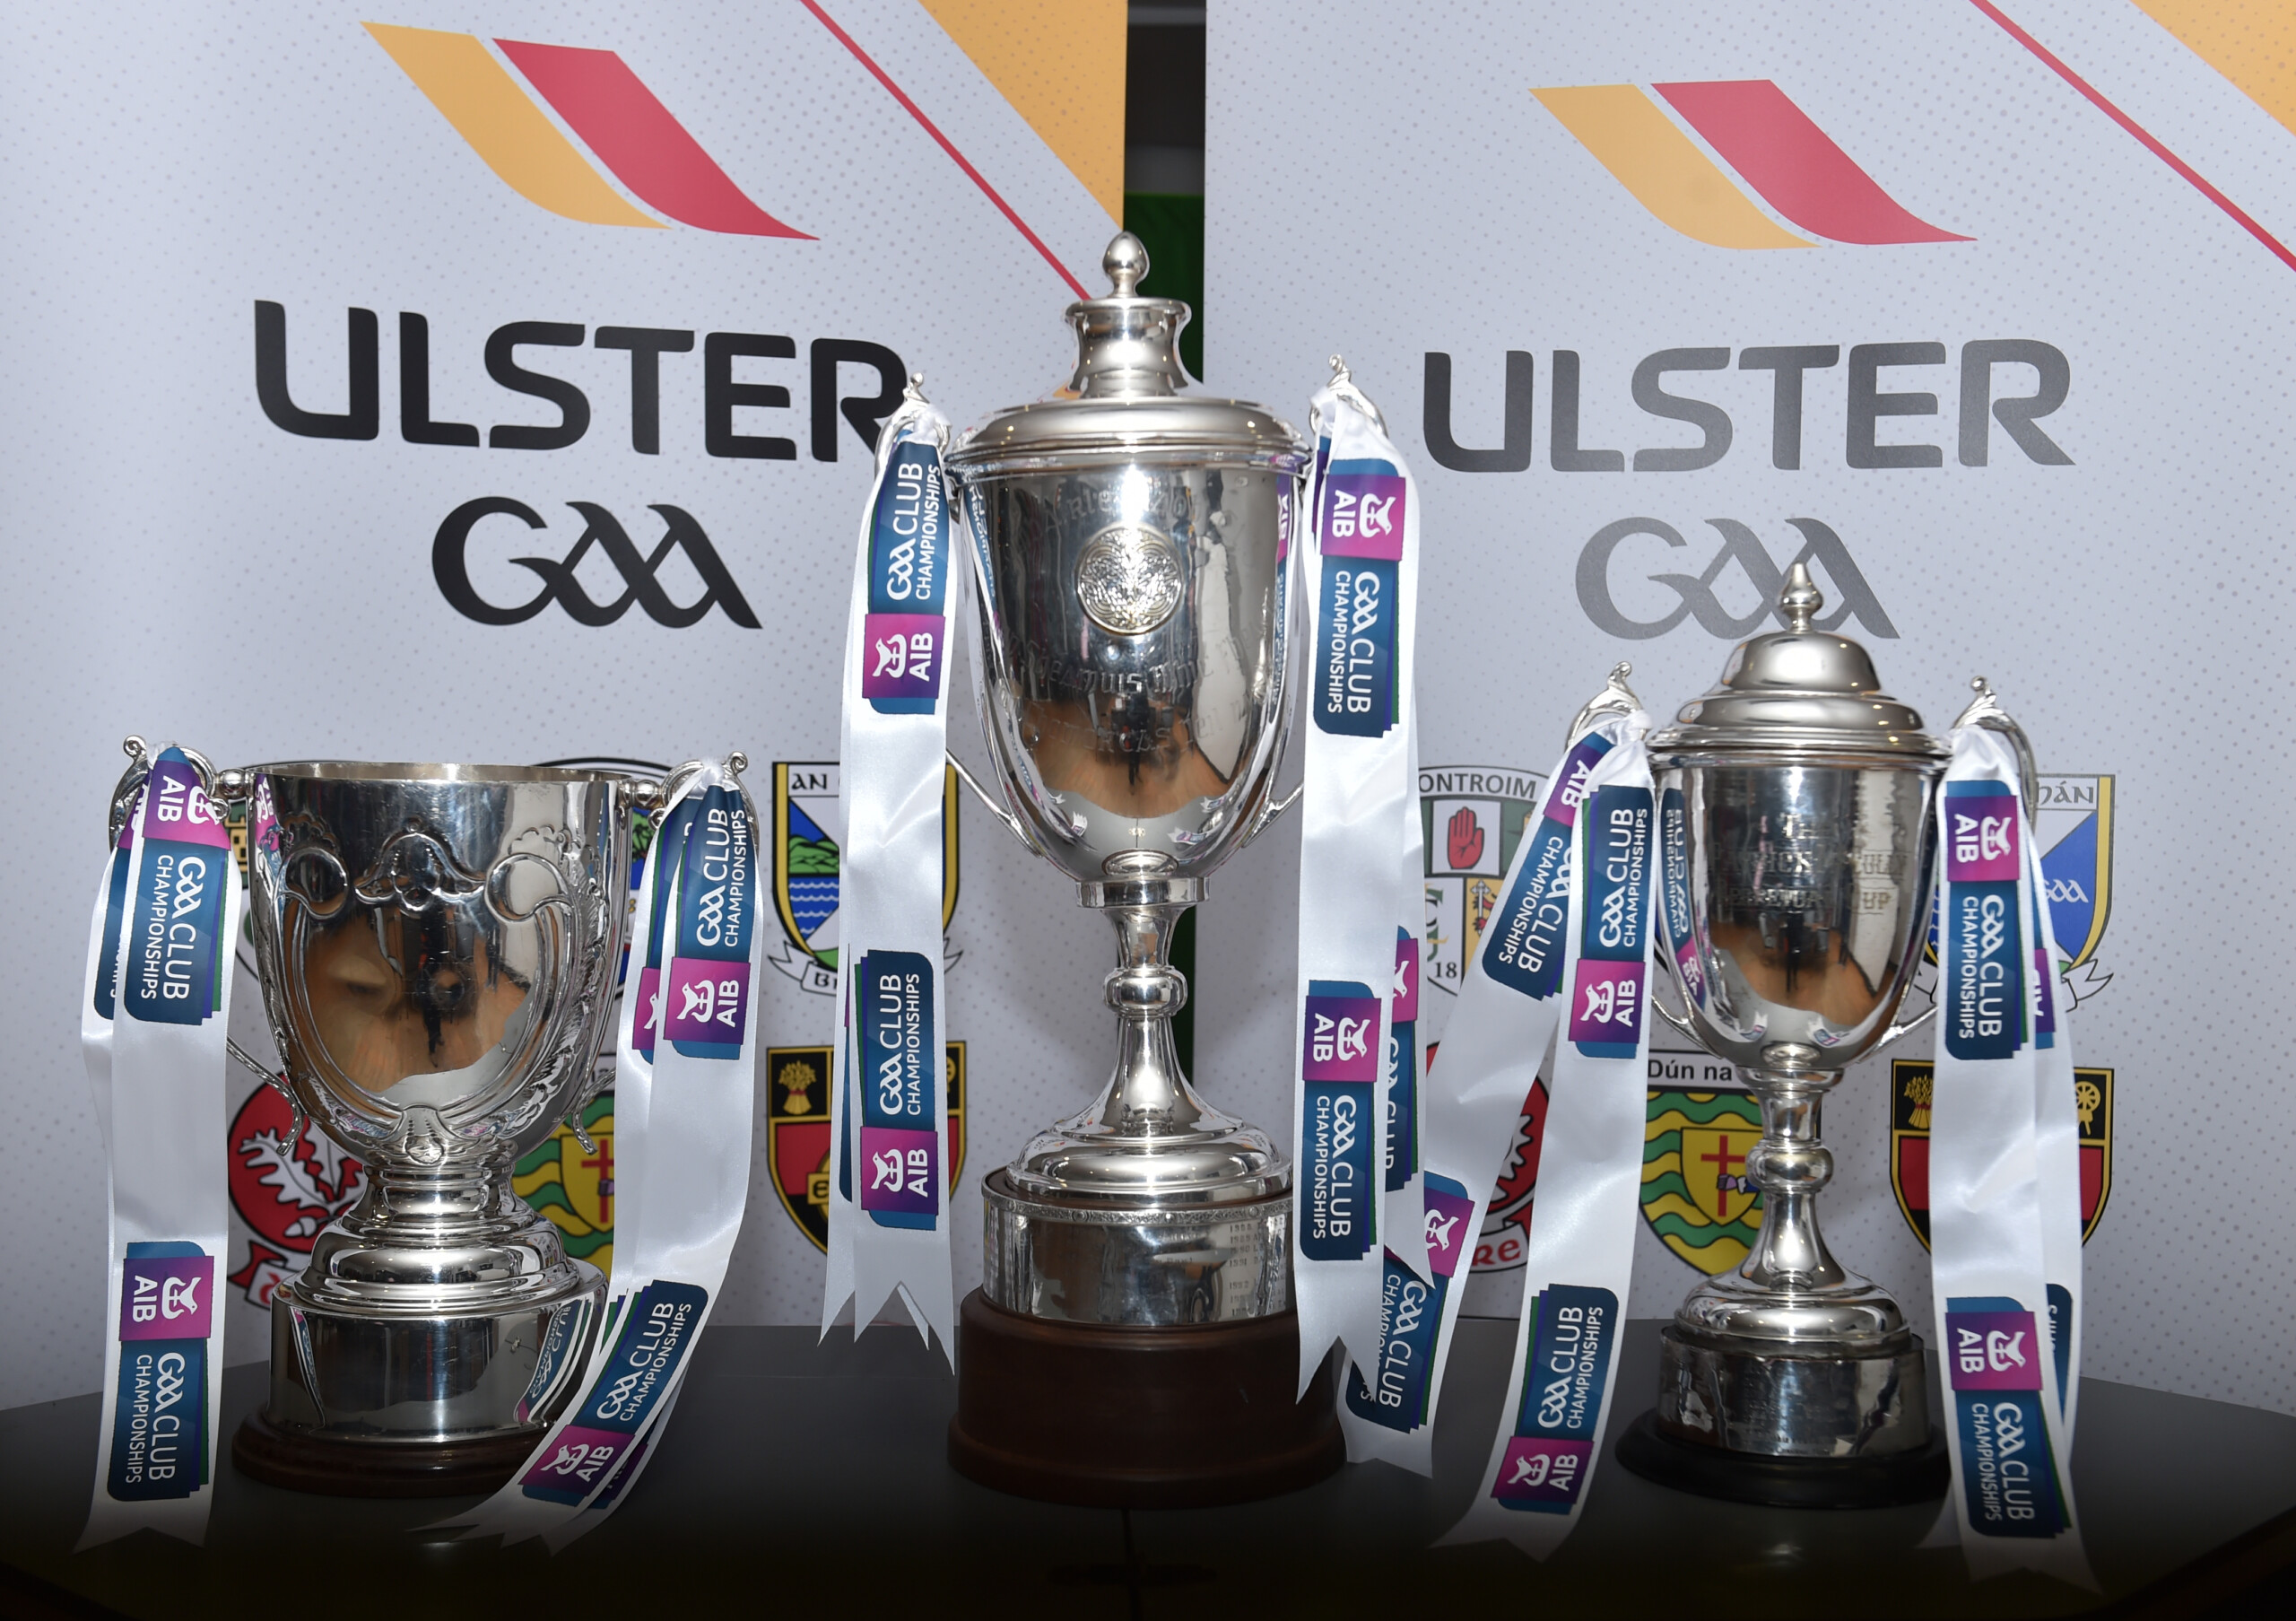 Information for supporters ahead of big Ulster Club Championship weekend